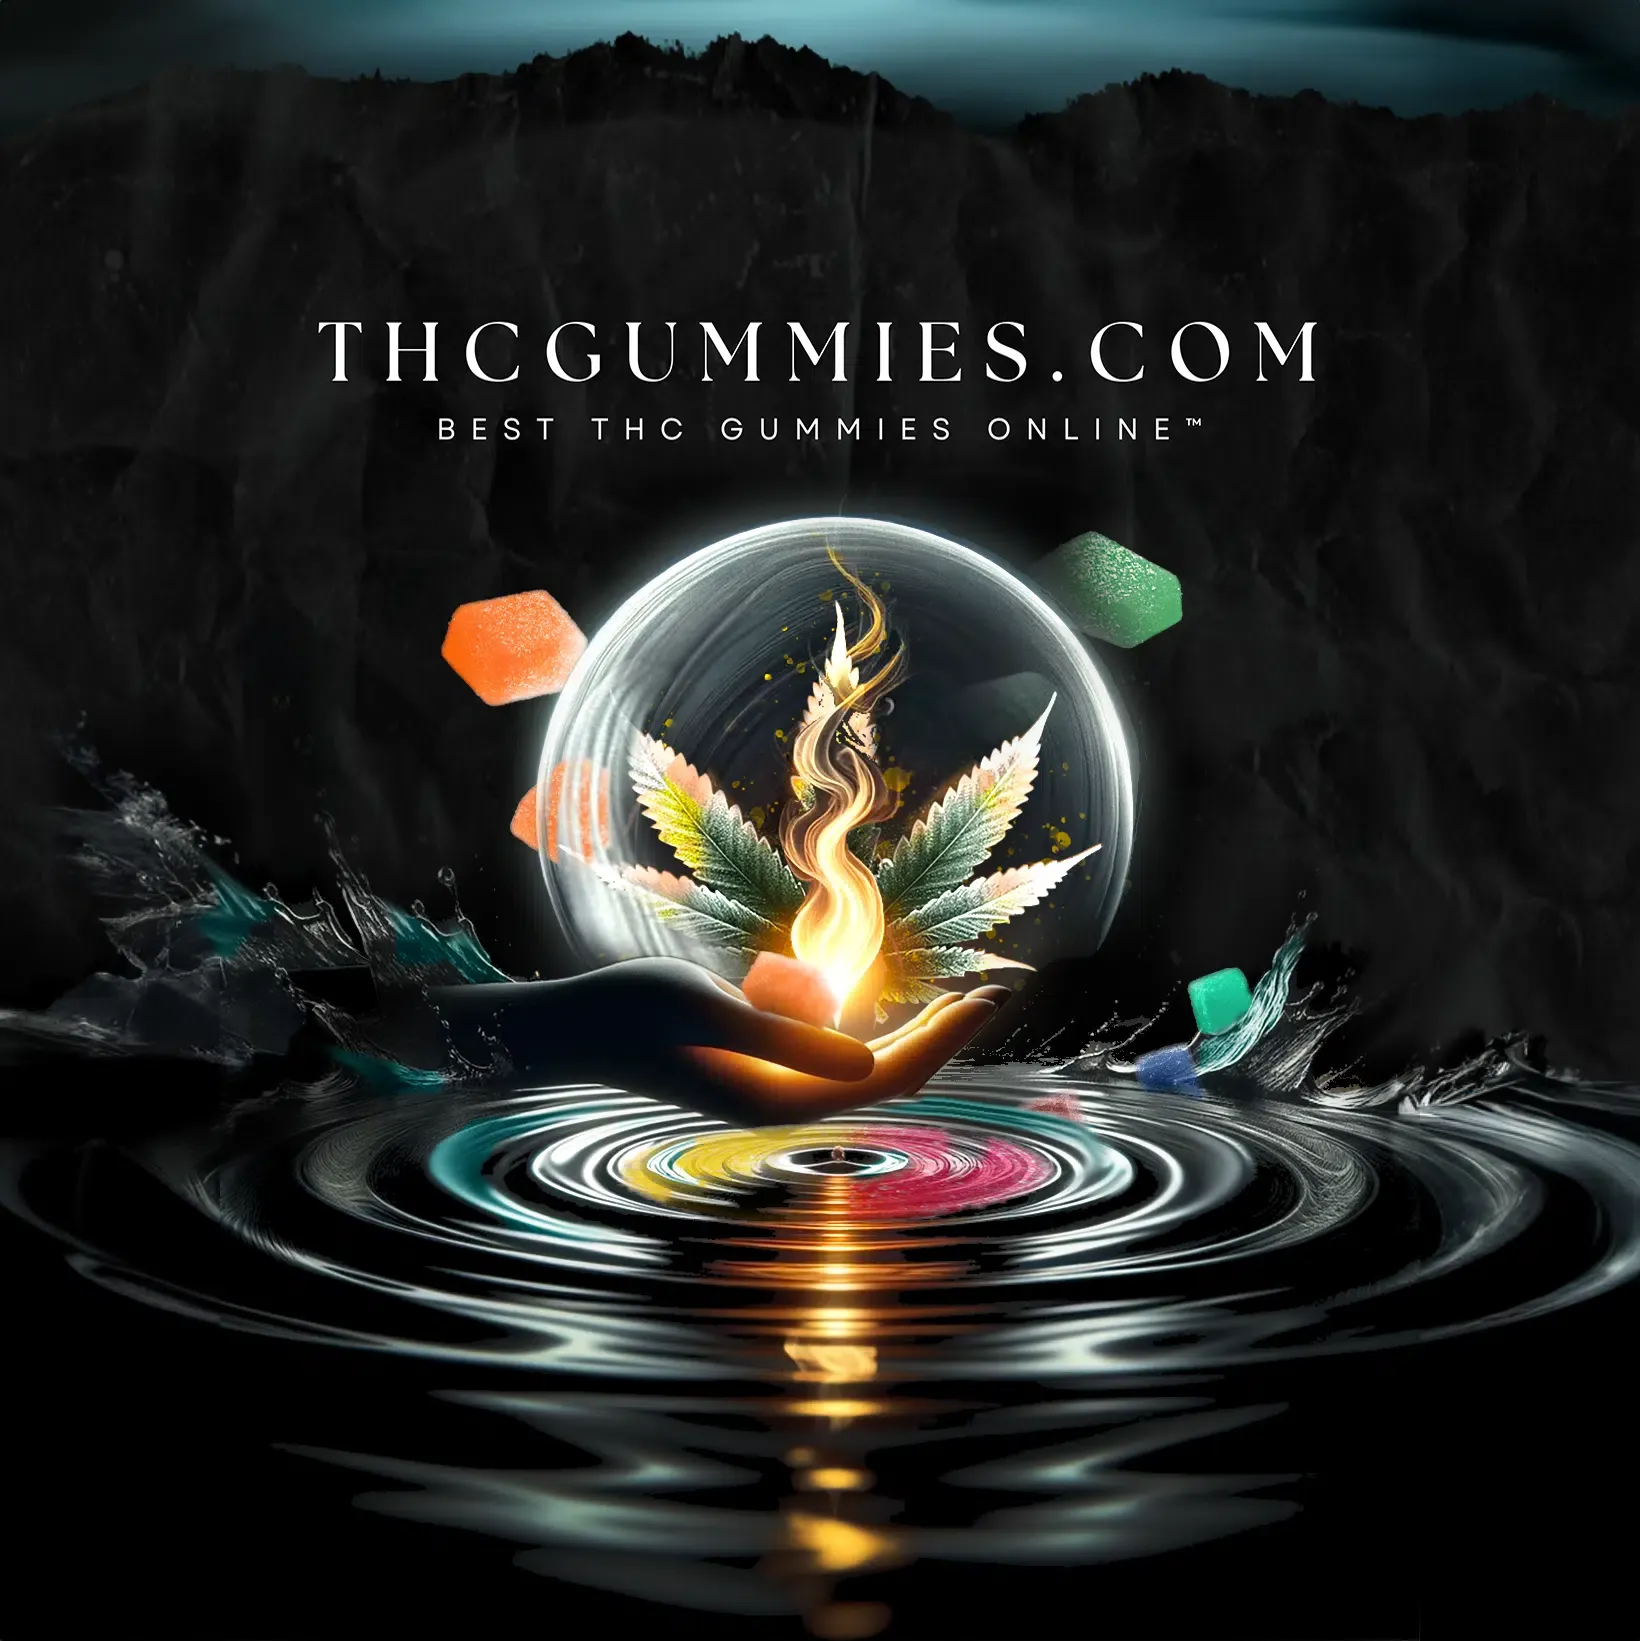 The image shows a combination of elements that conveys the theme of enlightenment and knowledge in the realm of cannabis. The image with its vivid flame, the ripples, and the cannabis leaf, the glowing orb, along with the cannabis gummies, creates a striking visual metaphor. The slogan "Igniting Ripples of Cannabis Wisdom" with the title, 'THCGummies.com', and the trademark, 'Best THC Gummies Online™' complements the imagery with a powerful message.